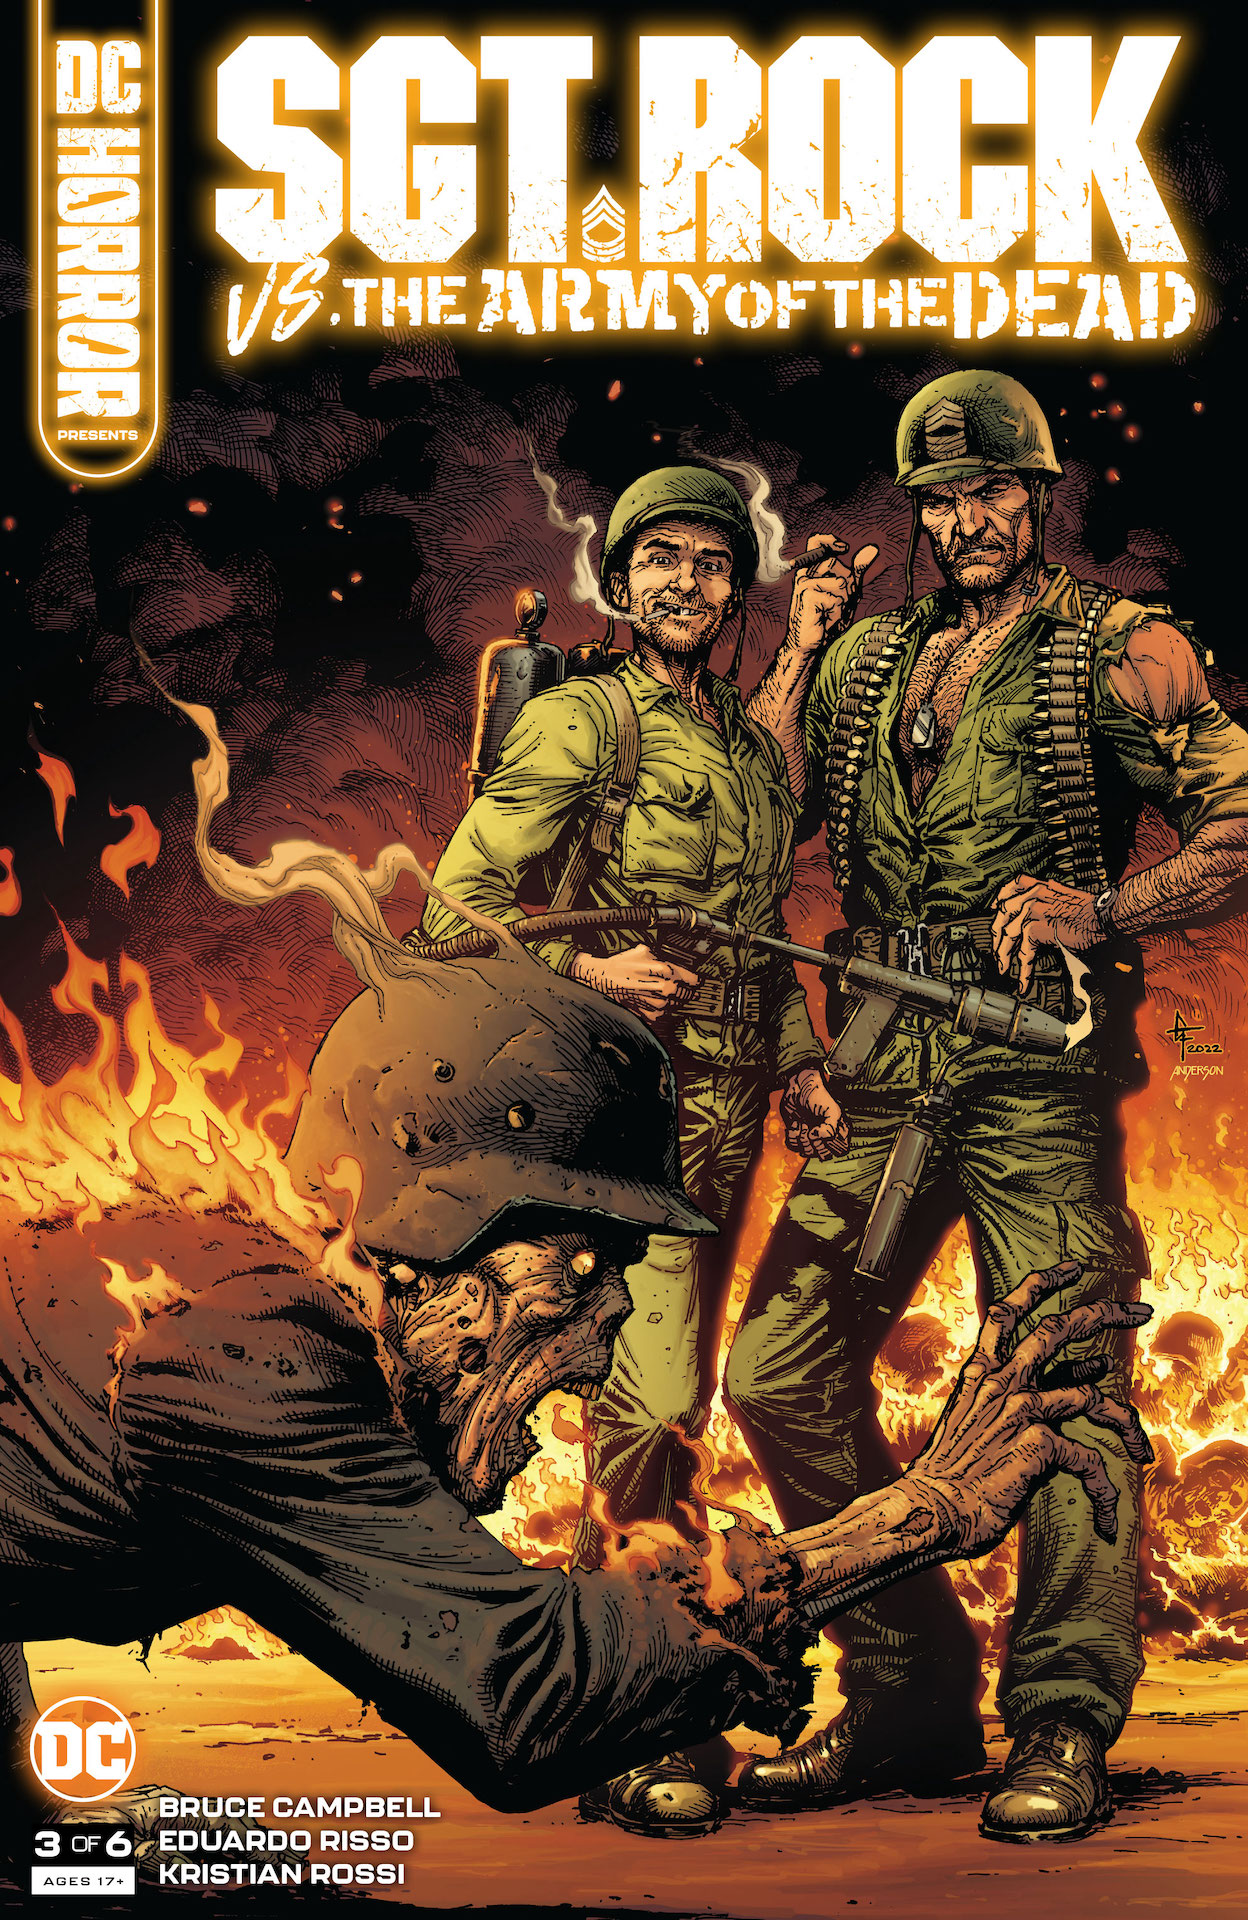 DC Preview: DC Horror Presents: Sgt. Rock vs. The Army of the Dead #3